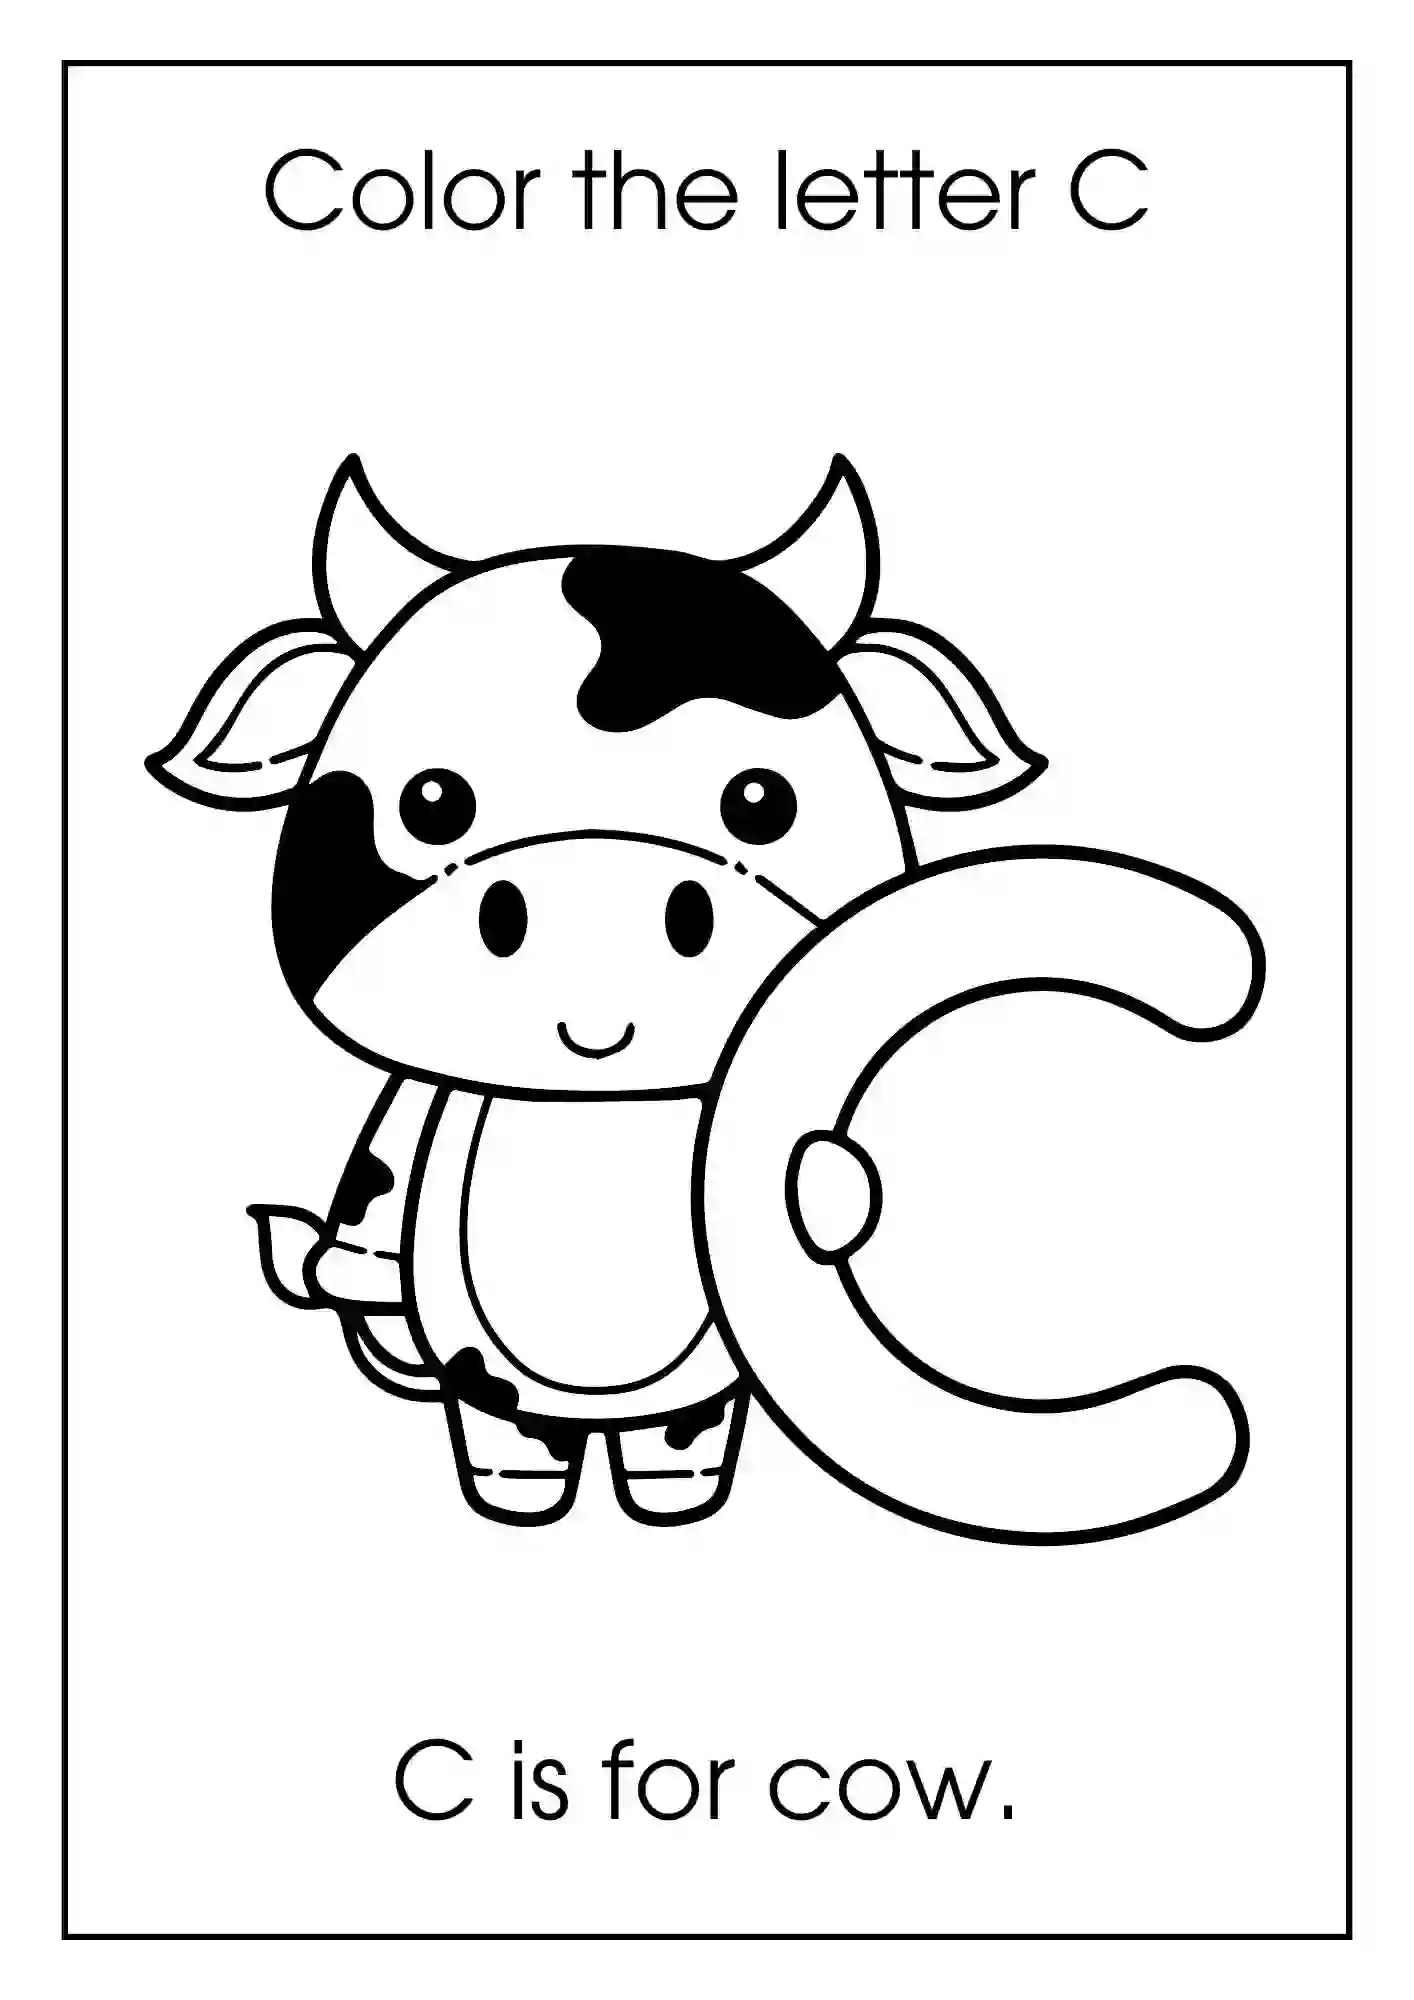 Animal Alphabet Coloring Worksheets For Kindergarten (Letter c with cow)